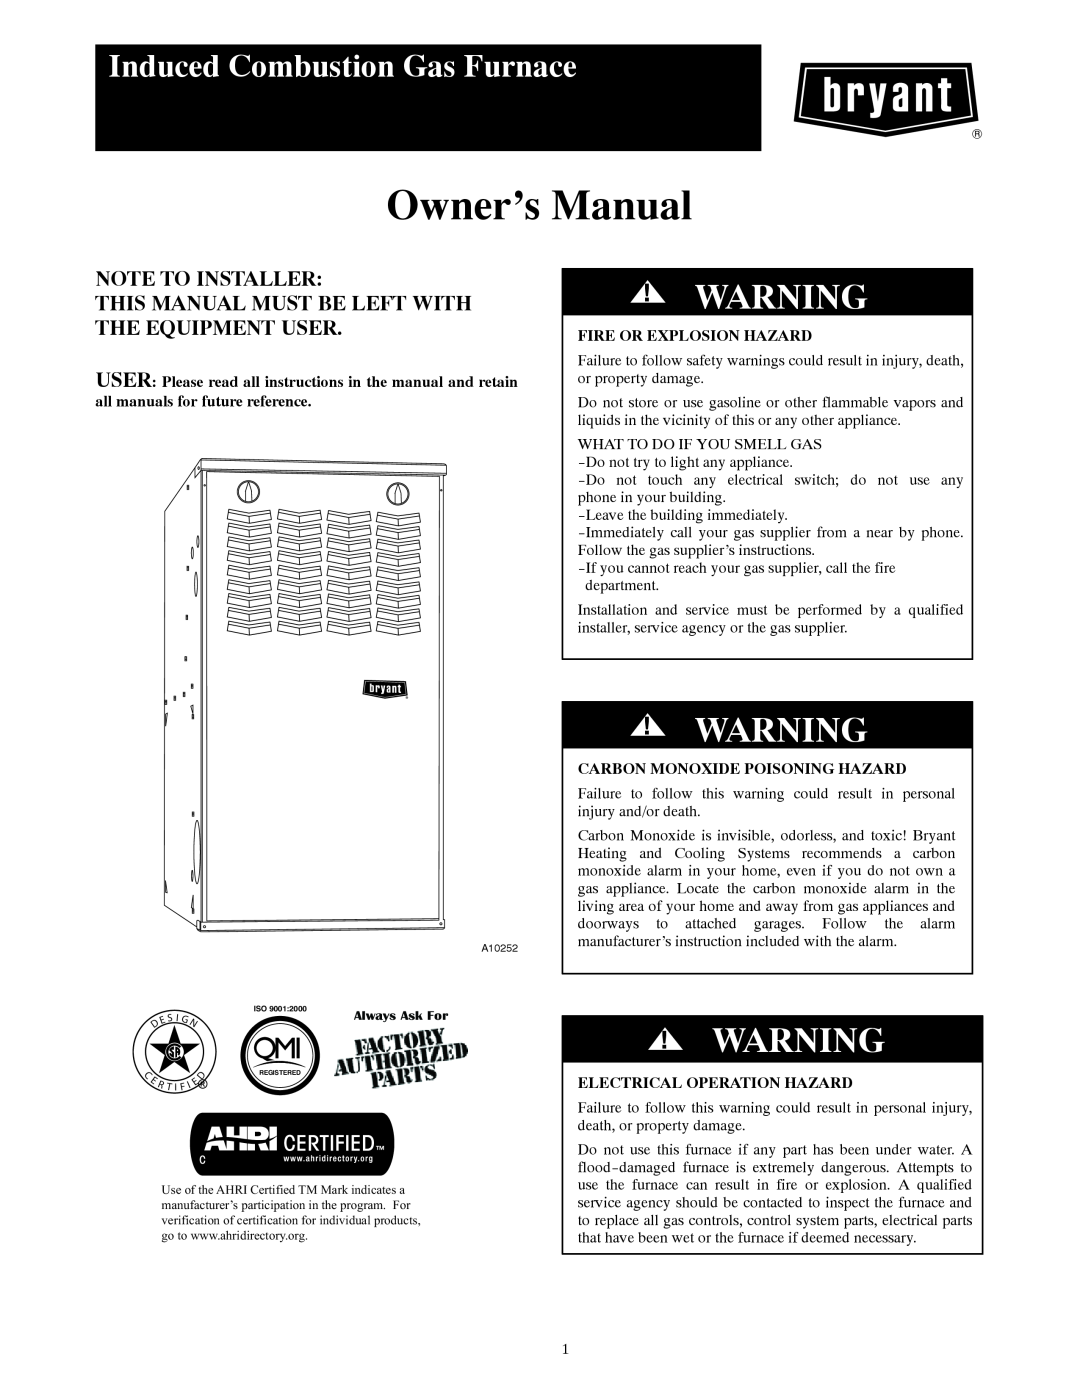 Bryant A10252 owner manual Note To Installer, This Manual Must Be Left With The Equipment User, Fire Or Explosion Hazard 